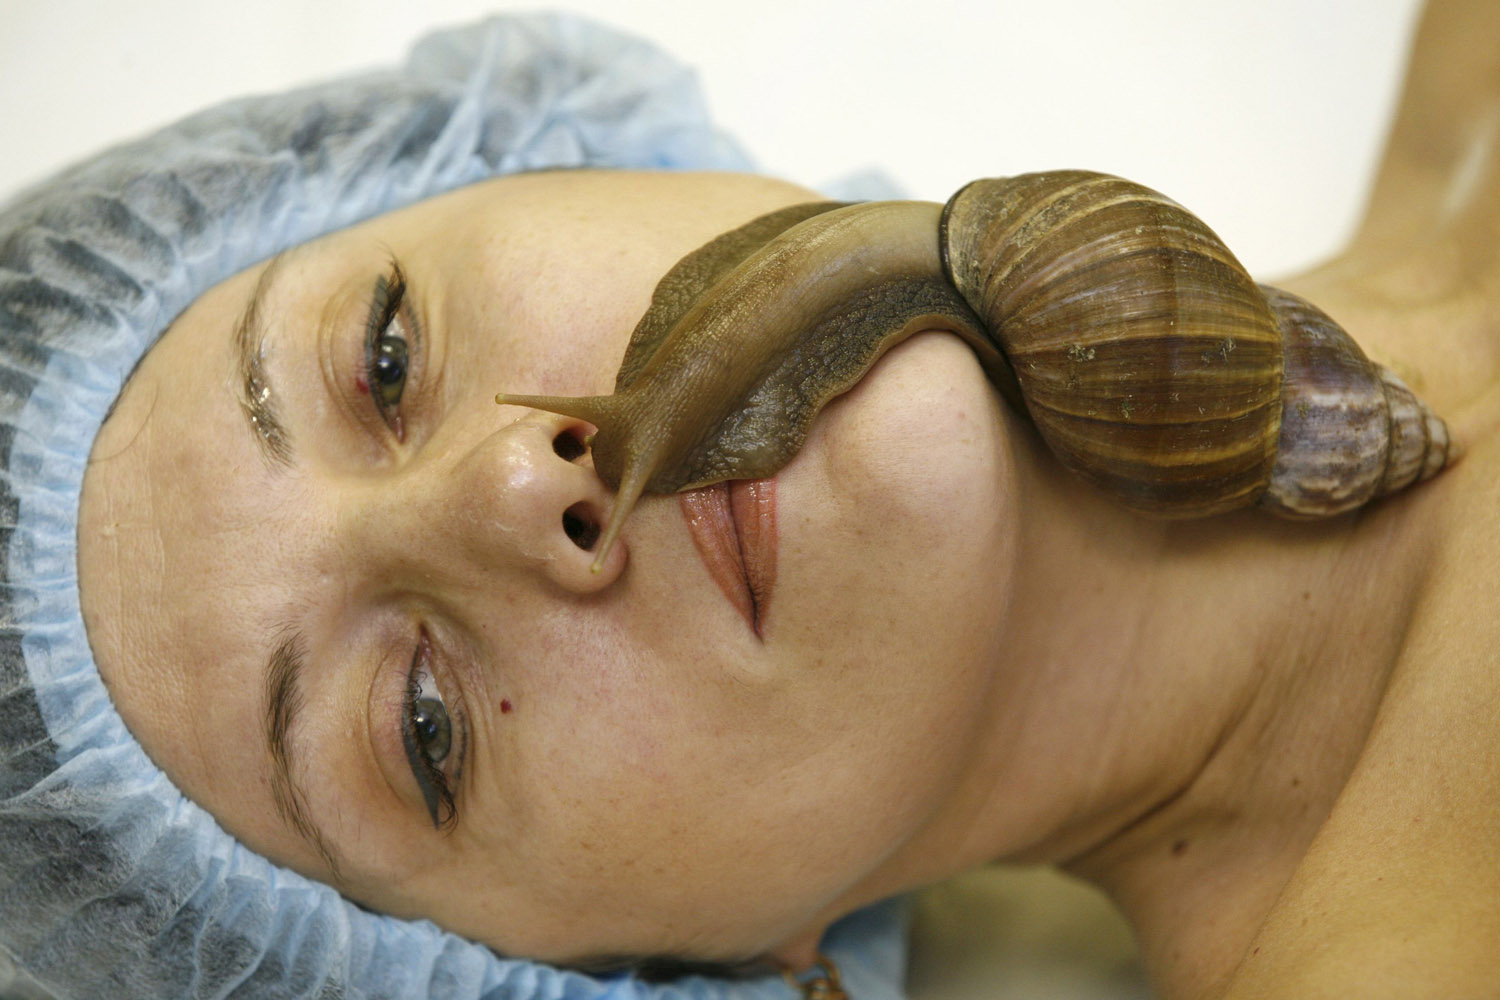 Nov. 19, 2013. A member of the  Ranetka  private family club takes a medical-cosmetic massage using the Achatina fulica snail, also known as the Giant African land snail, at the club in Russia's Siberian city of Krasnoyarsk.